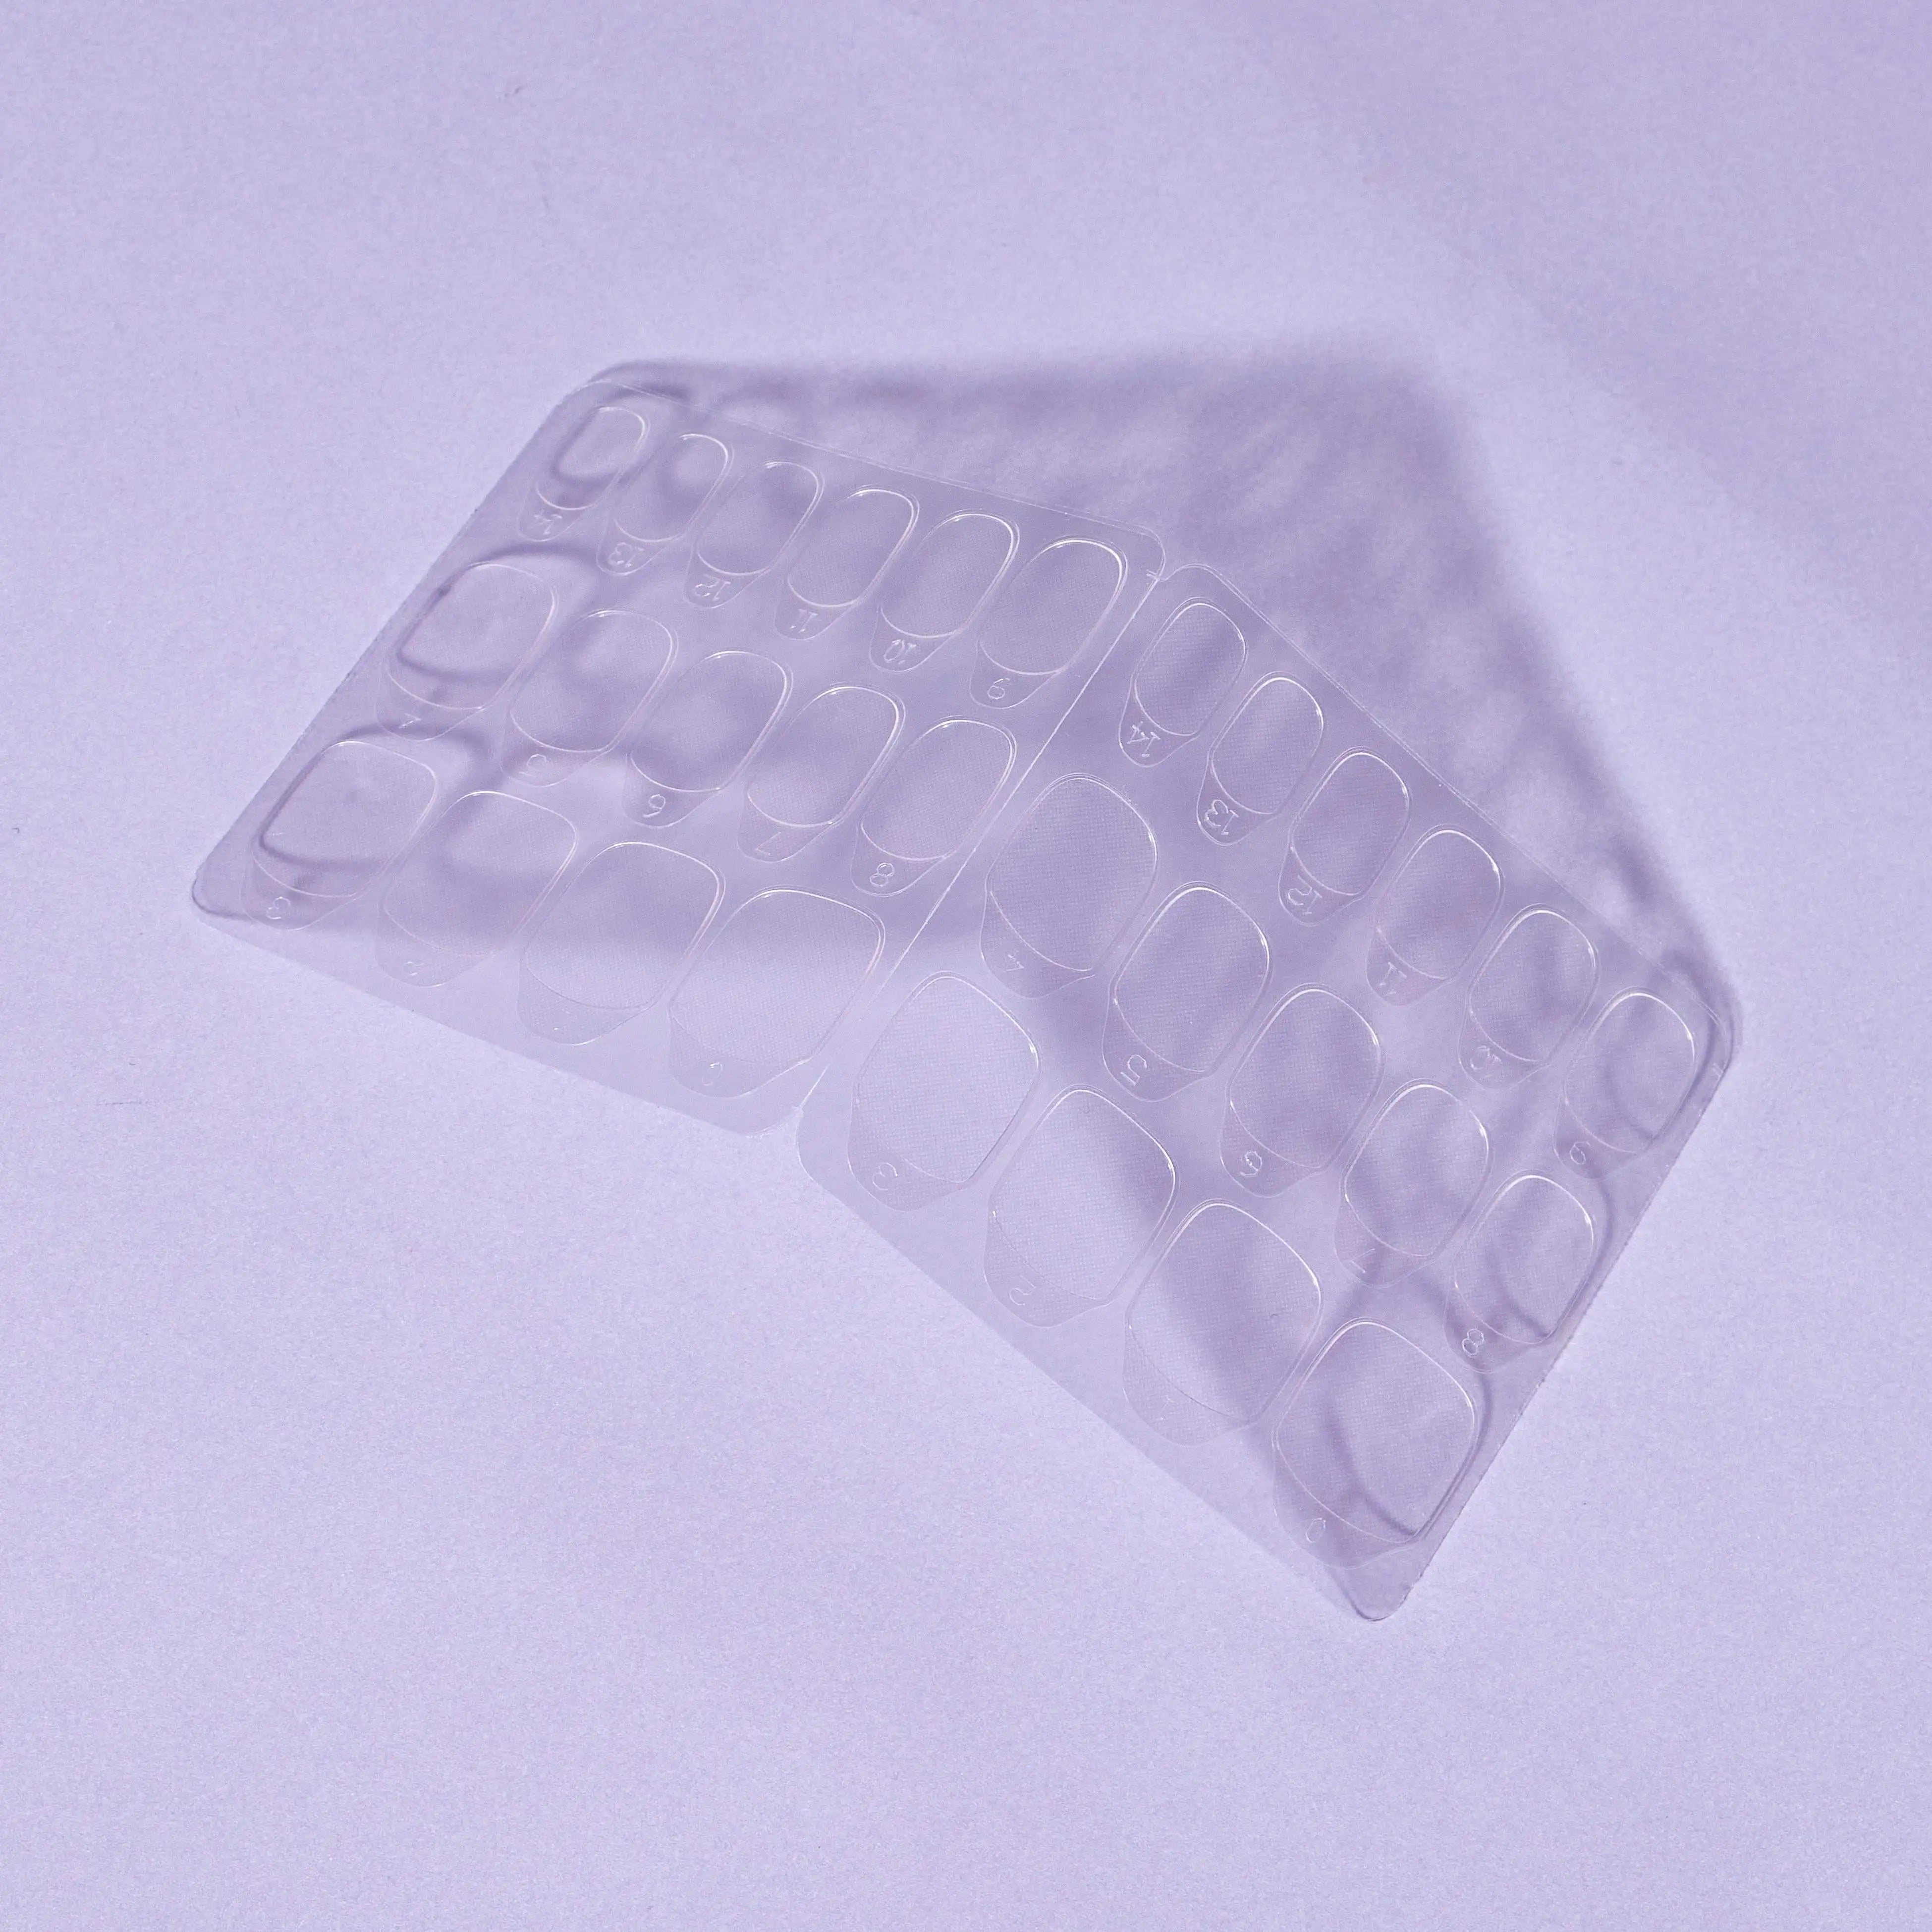 Pretty Pro - Super Adhesive Tabs For Press On Nails - 24 Pieces & 12 Sizes  (40123)